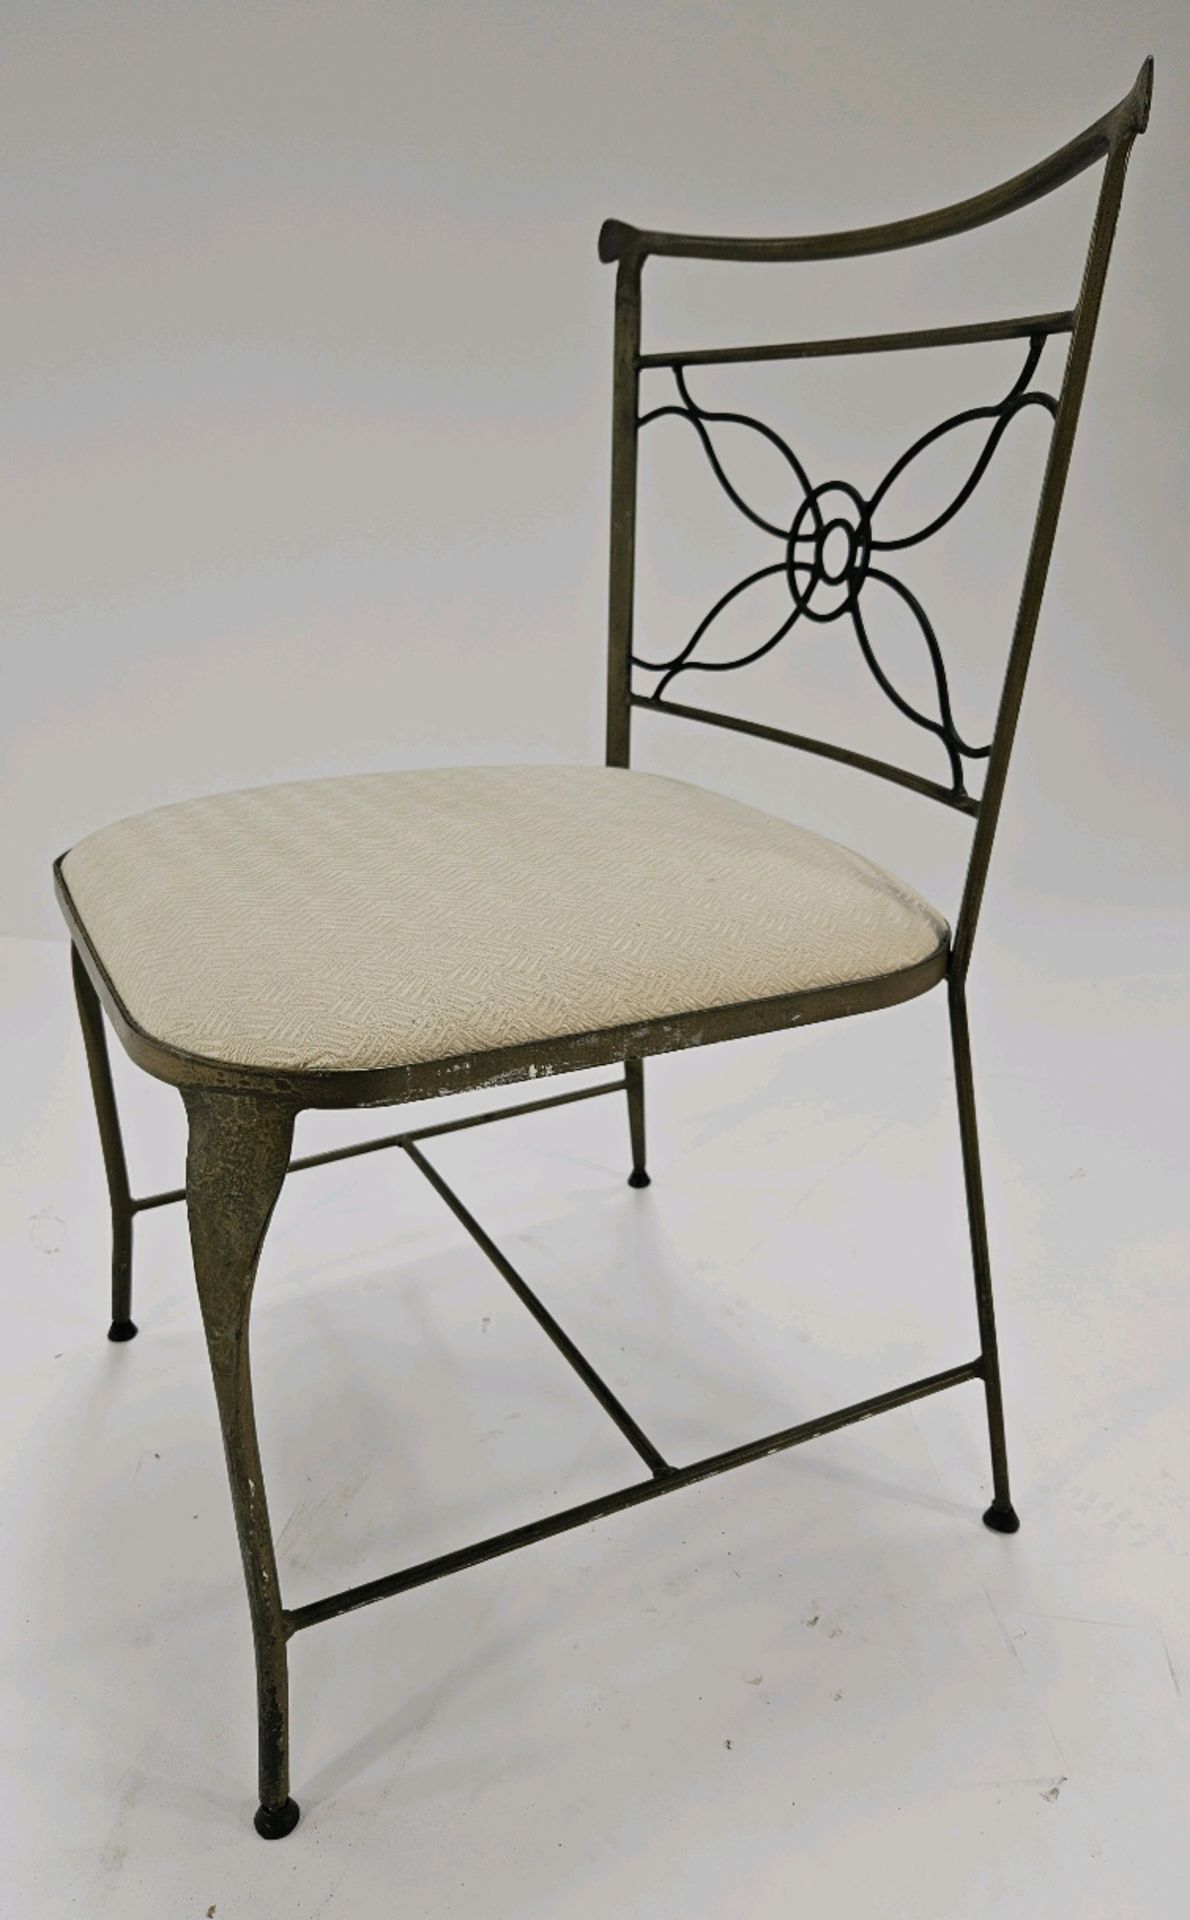 Rene Prou Dining Chair - Image 2 of 3